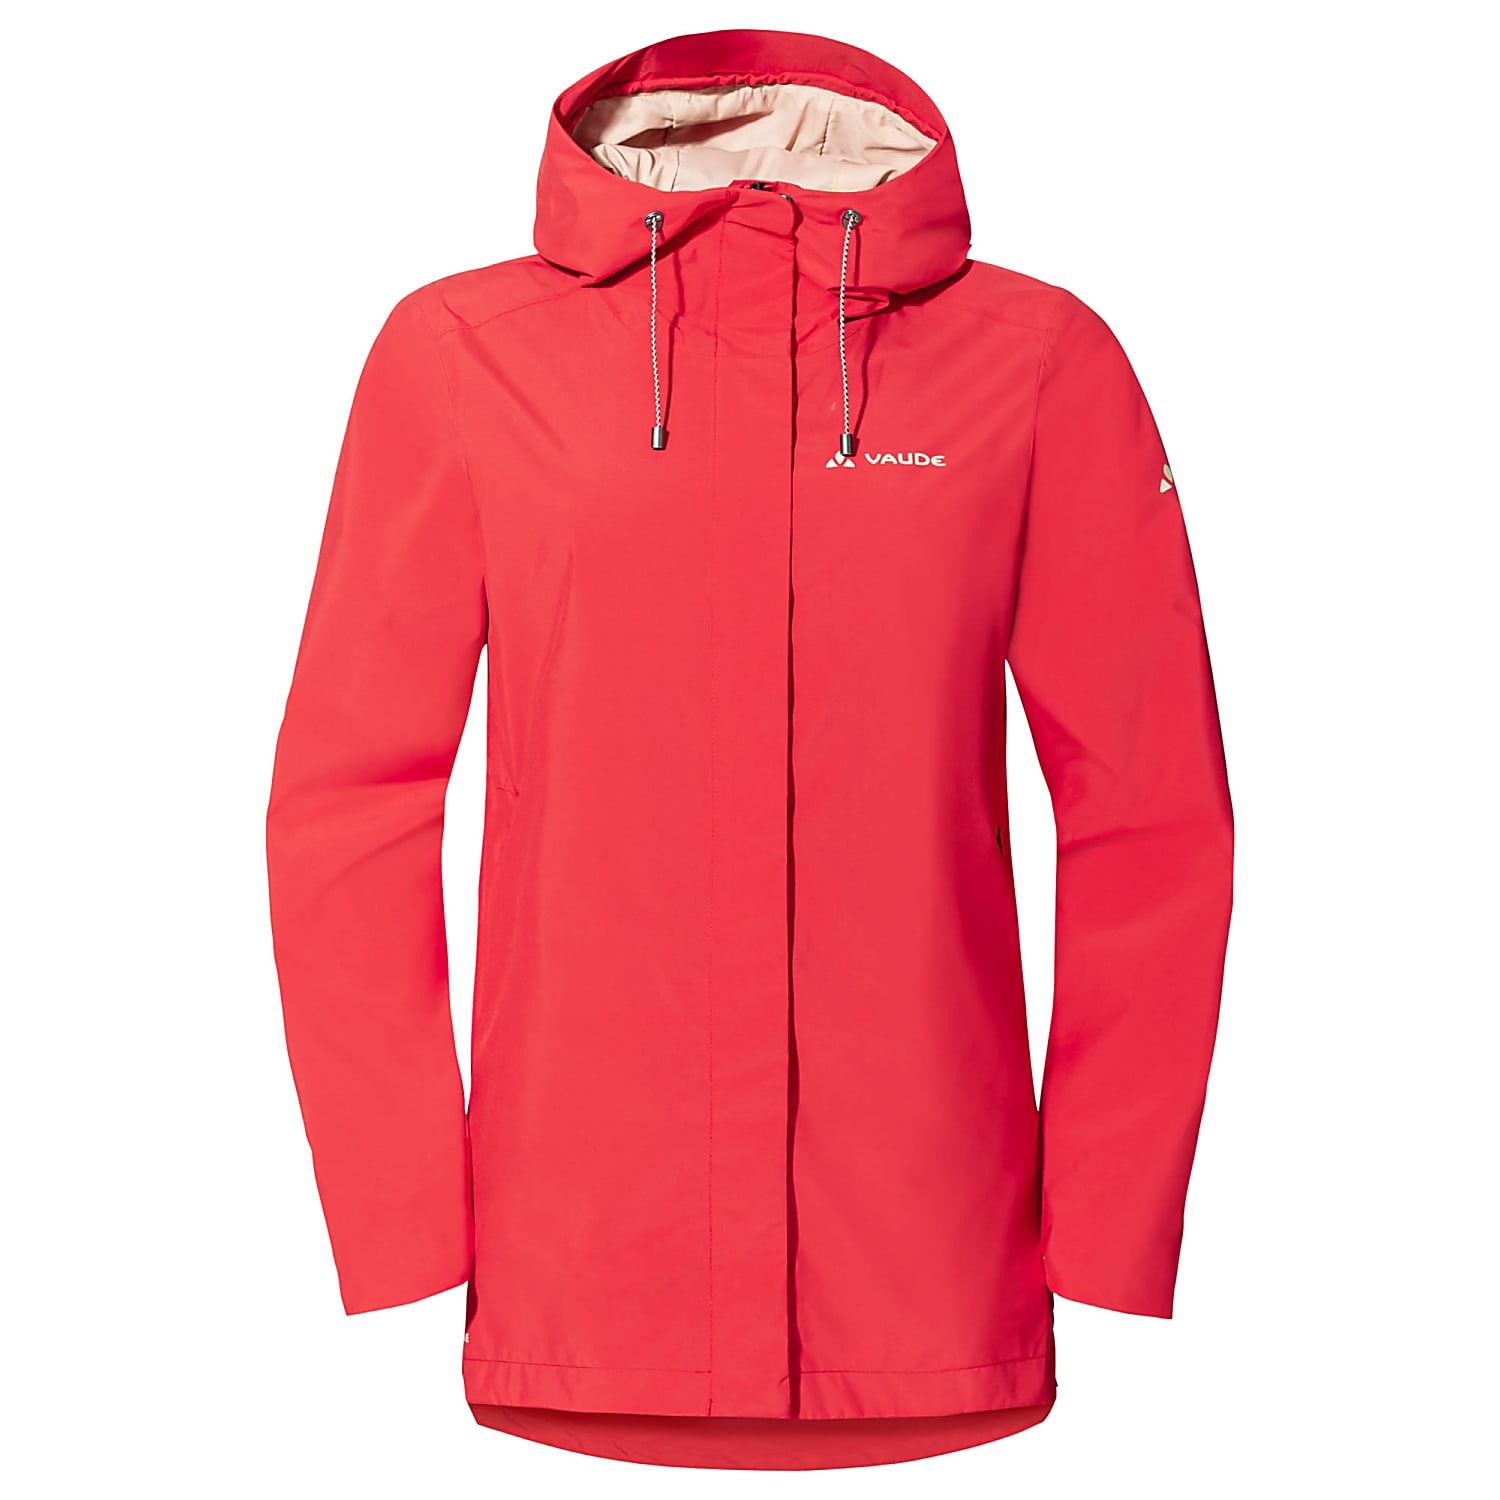 Flame shipping and II, MINEO - Fast 2L JACKET cheap Vaude WOMENS